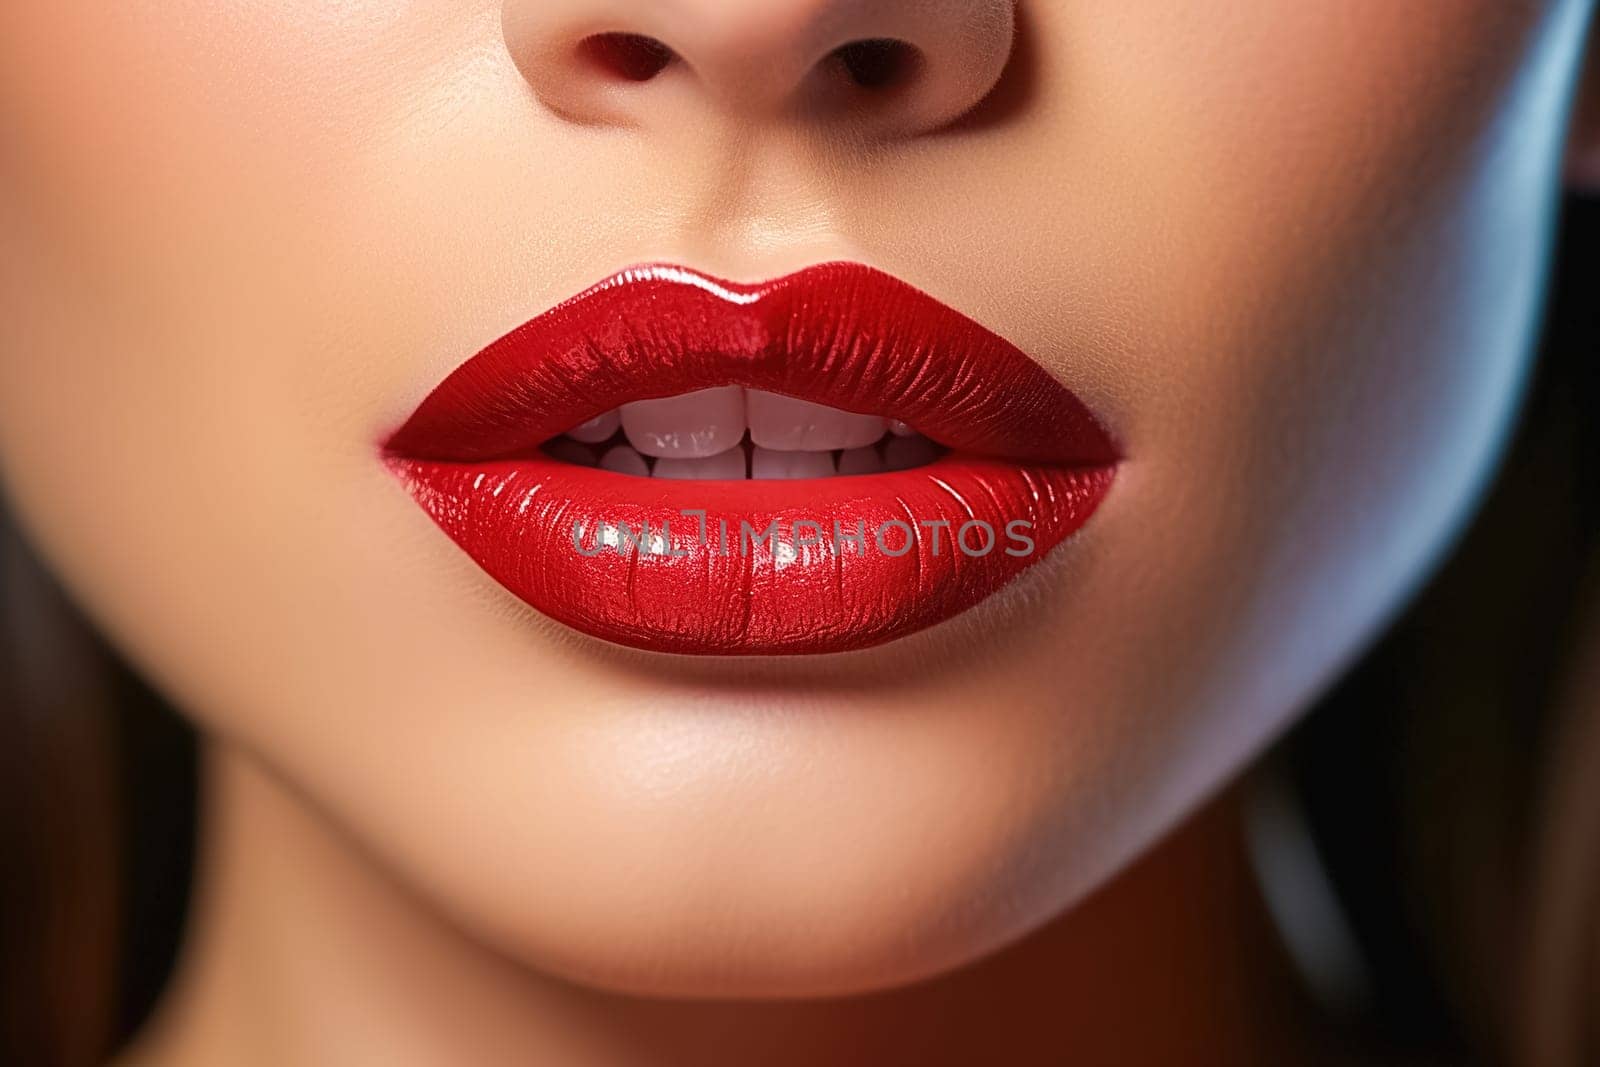 Beautiful lip makeup with red lipstick close-up. by Yurich32